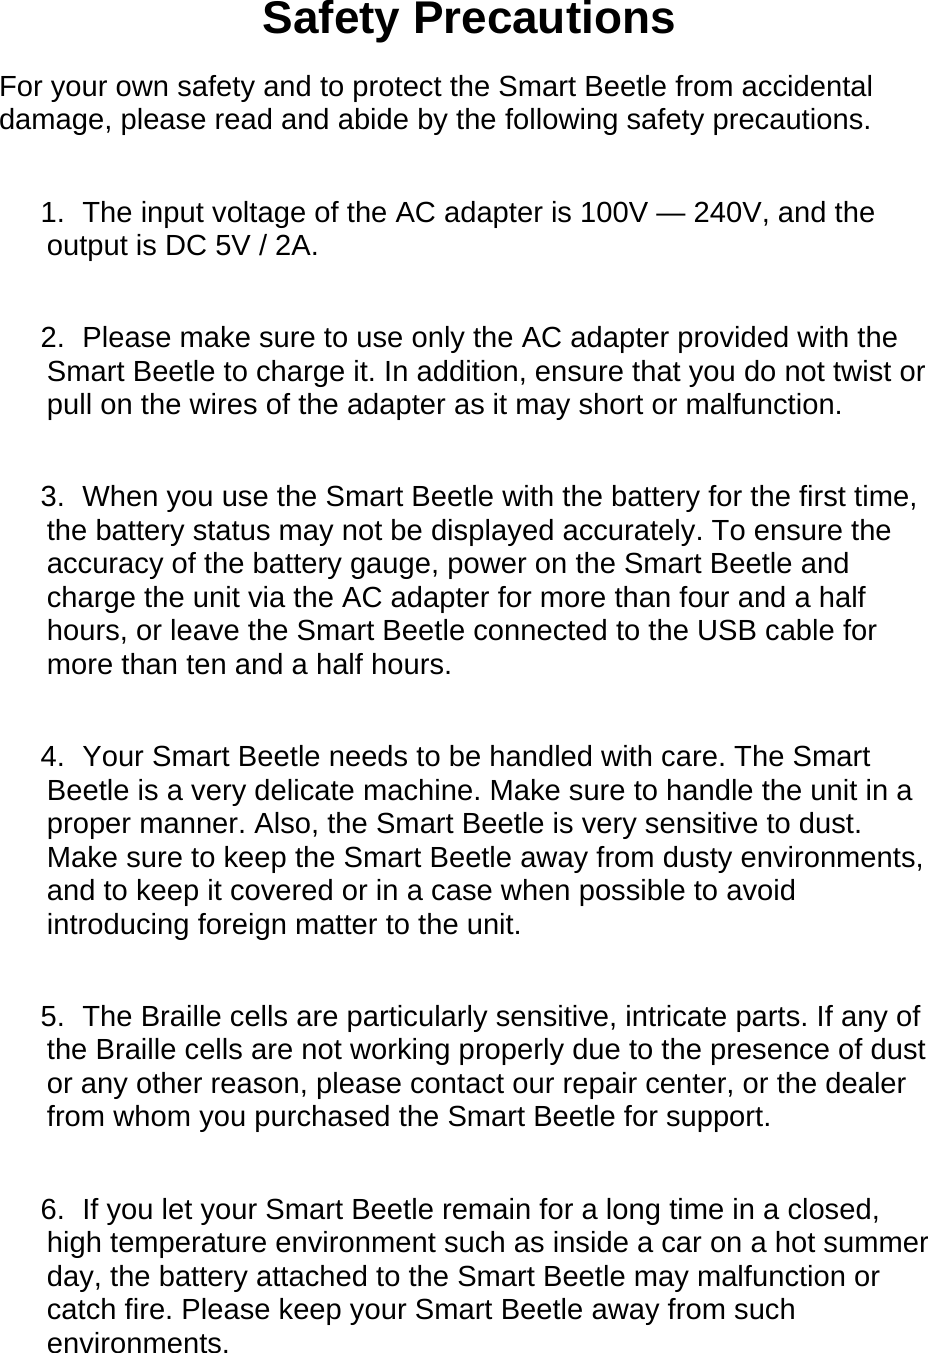 Safety Precautions For your own safety and to protect the Smart Beetle from accidental damage, please read and abide by the following safety precautions.  1.  The input voltage of the AC adapter is 100V — 240V, and the output is DC 5V / 2A.  2.  Please make sure to use only the AC adapter provided with the Smart Beetle to charge it. In addition, ensure that you do not twist or pull on the wires of the adapter as it may short or malfunction.    3.  When you use the Smart Beetle with the battery for the first time, the battery status may not be displayed accurately. To ensure the accuracy of the battery gauge, power on the Smart Beetle and charge the unit via the AC adapter for more than four and a half hours, or leave the Smart Beetle connected to the USB cable for more than ten and a half hours.    4.  Your Smart Beetle needs to be handled with care. The Smart Beetle is a very delicate machine. Make sure to handle the unit in a proper manner. Also, the Smart Beetle is very sensitive to dust. Make sure to keep the Smart Beetle away from dusty environments, and to keep it covered or in a case when possible to avoid introducing foreign matter to the unit.  5.  The Braille cells are particularly sensitive, intricate parts. If any of the Braille cells are not working properly due to the presence of dust or any other reason, please contact our repair center, or the dealer from whom you purchased the Smart Beetle for support.  6.  If you let your Smart Beetle remain for a long time in a closed, high temperature environment such as inside a car on a hot summer day, the battery attached to the Smart Beetle may malfunction or catch fire. Please keep your Smart Beetle away from such environments.  